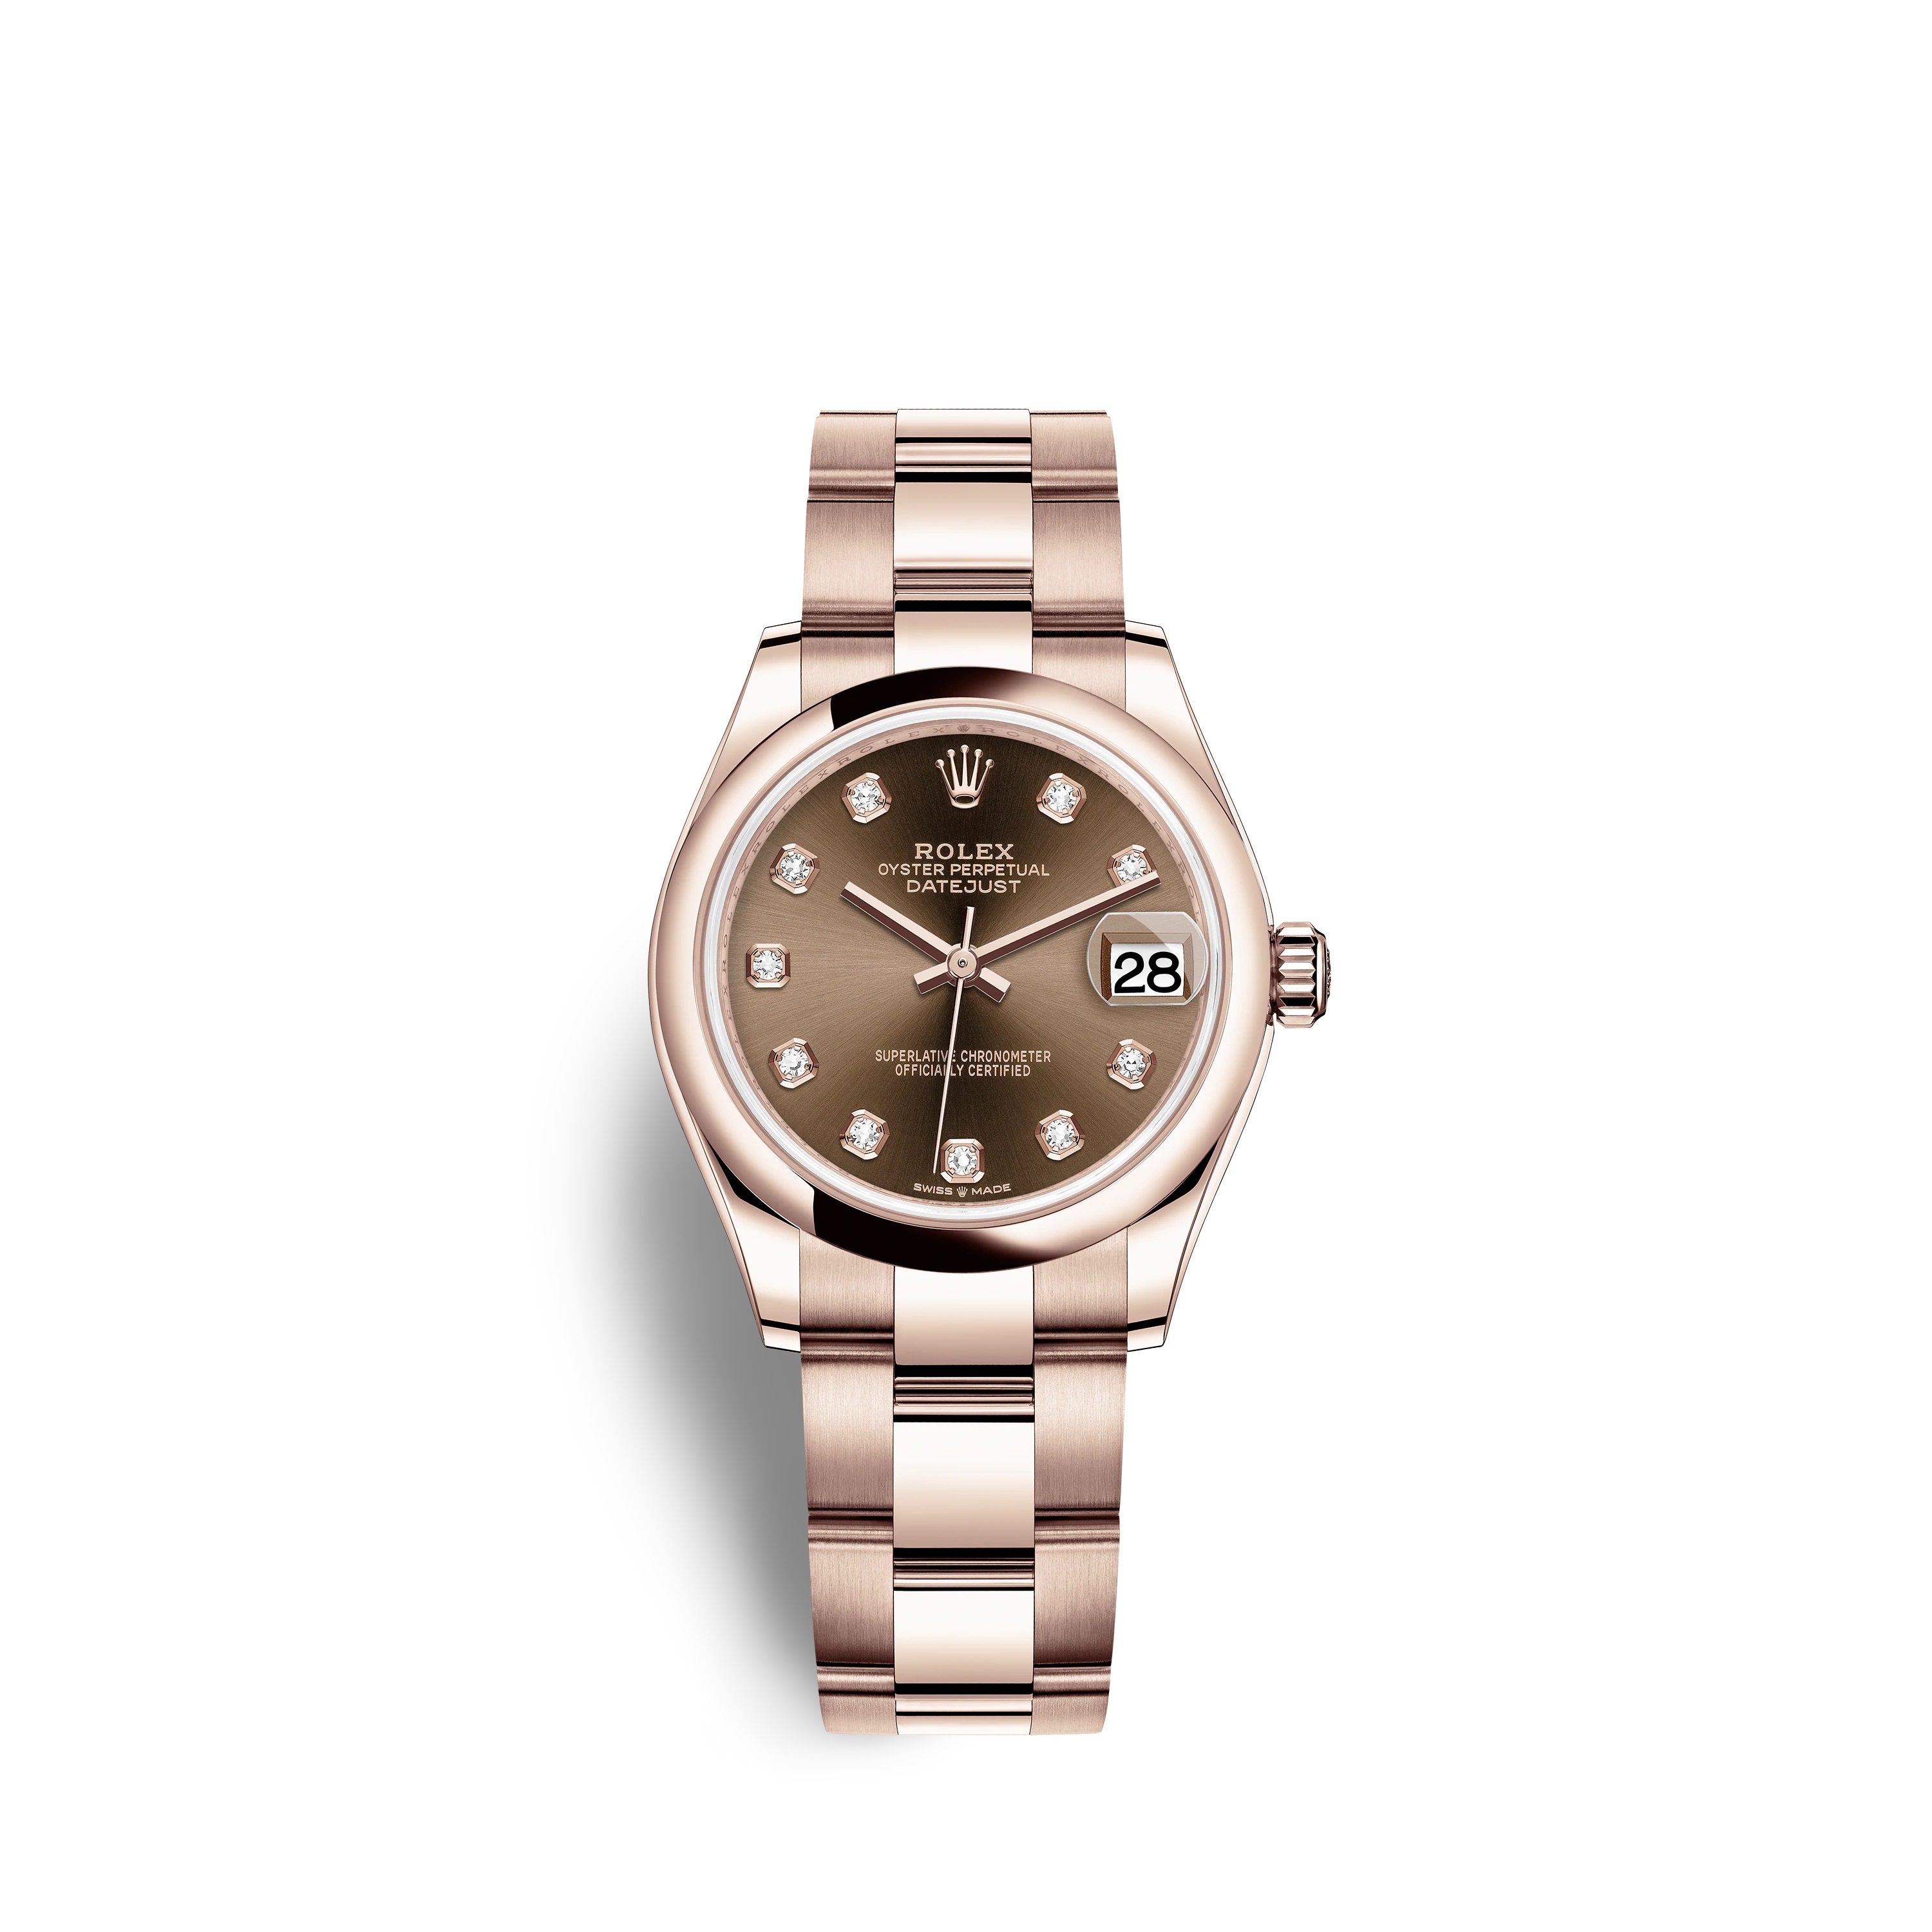 Datejust 31 278245 Rose Gold Watch (Chocolate Set with Diamonds) - Click Image to Close